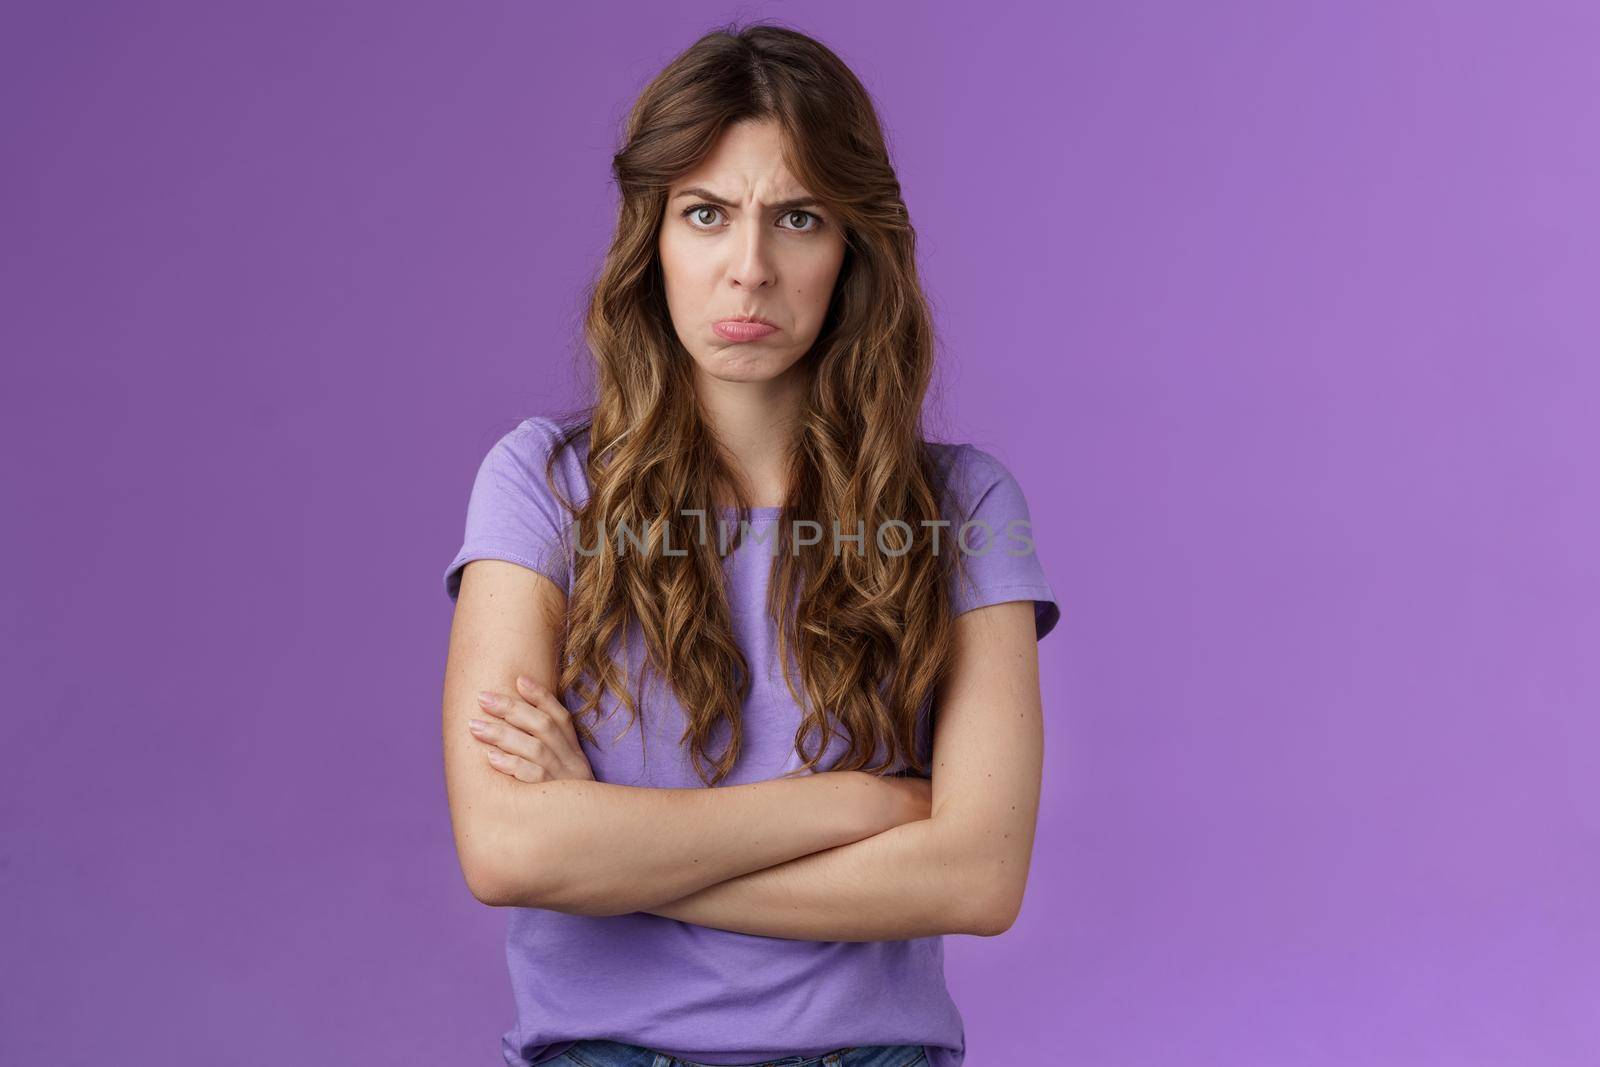 Offended silly timid cute girl sulking pouting lips frowning whining upset cross hands block pose insulted look moody camera disagree acting childish complaining unfair game purple background by Benzoix